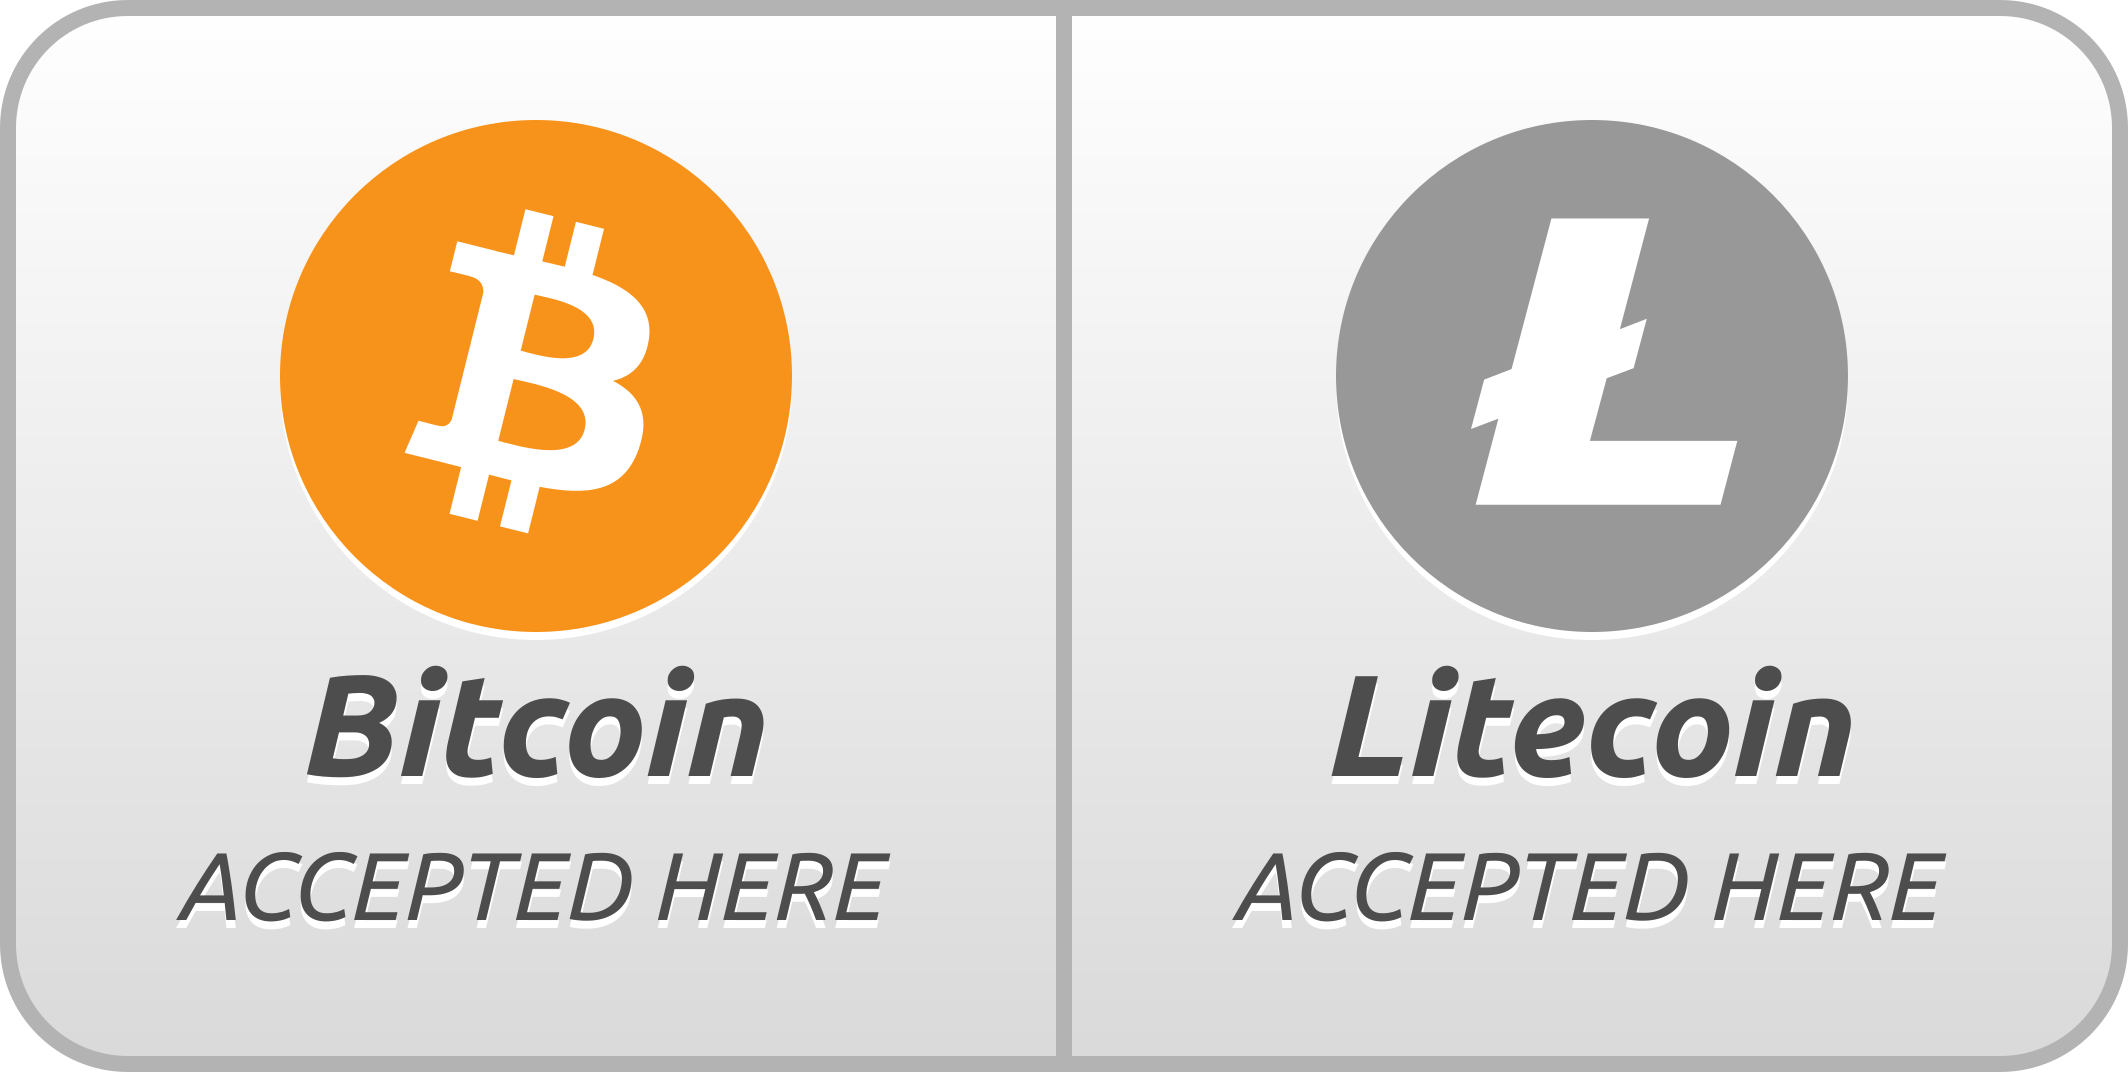 what accepts litecoin